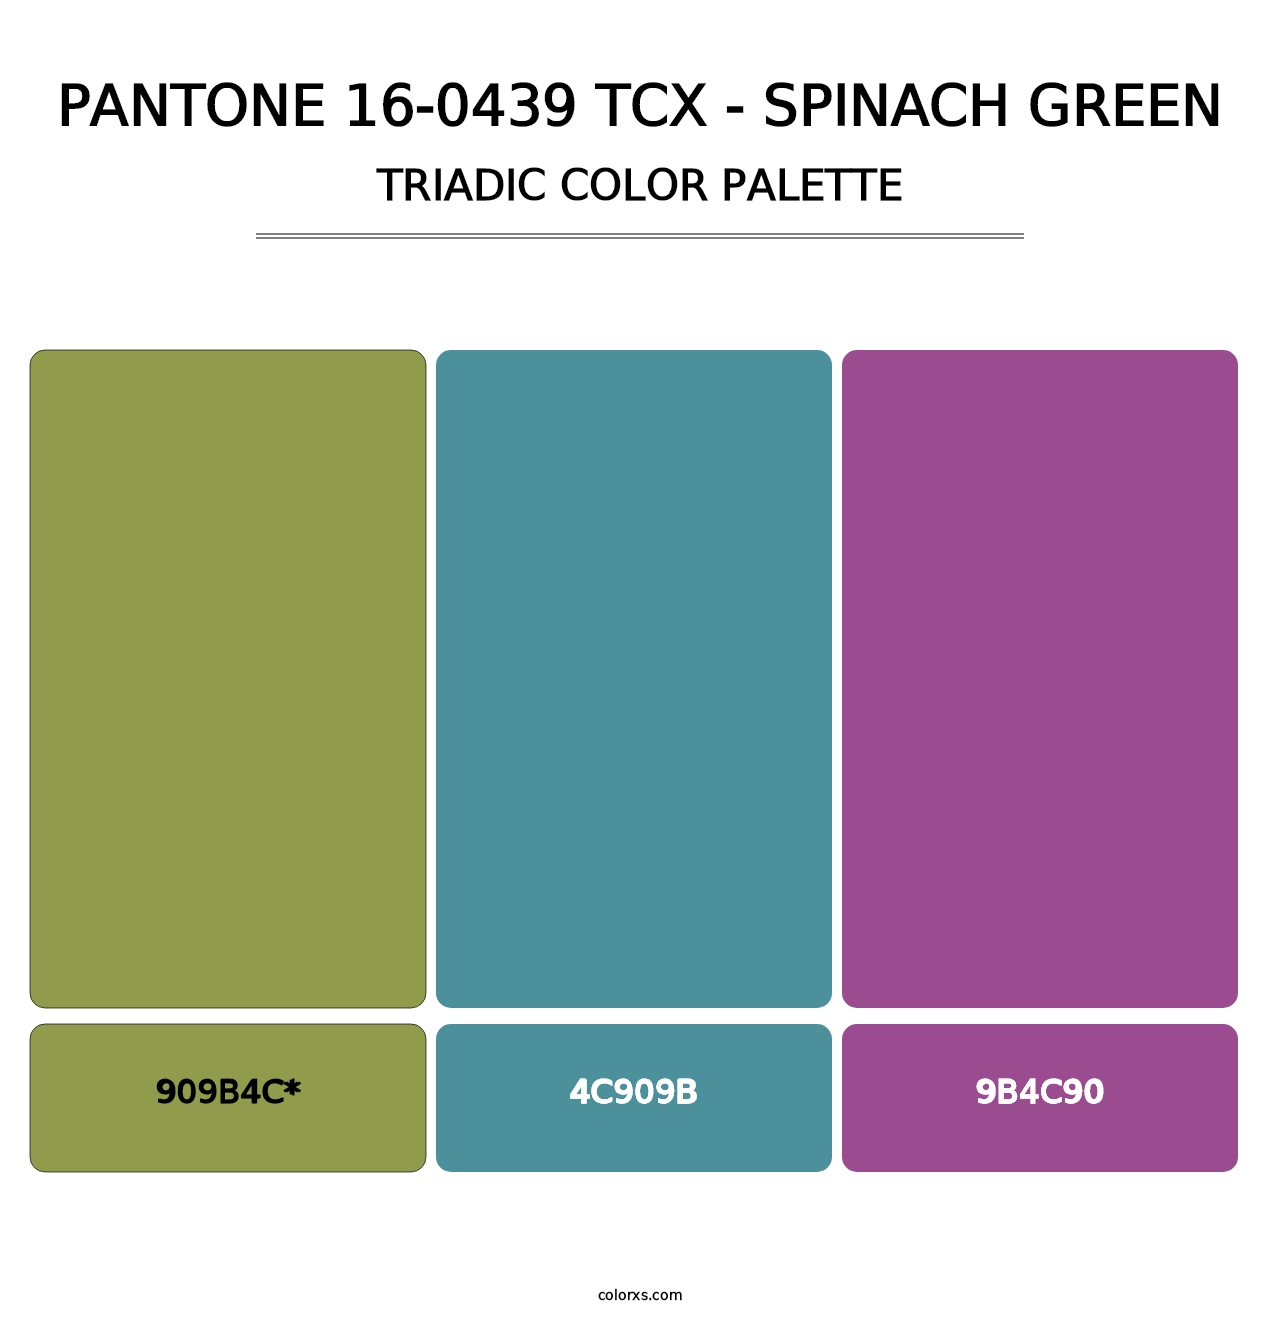 PANTONE 16-0439 TCX - Spinach Green - Triadic Color Palette